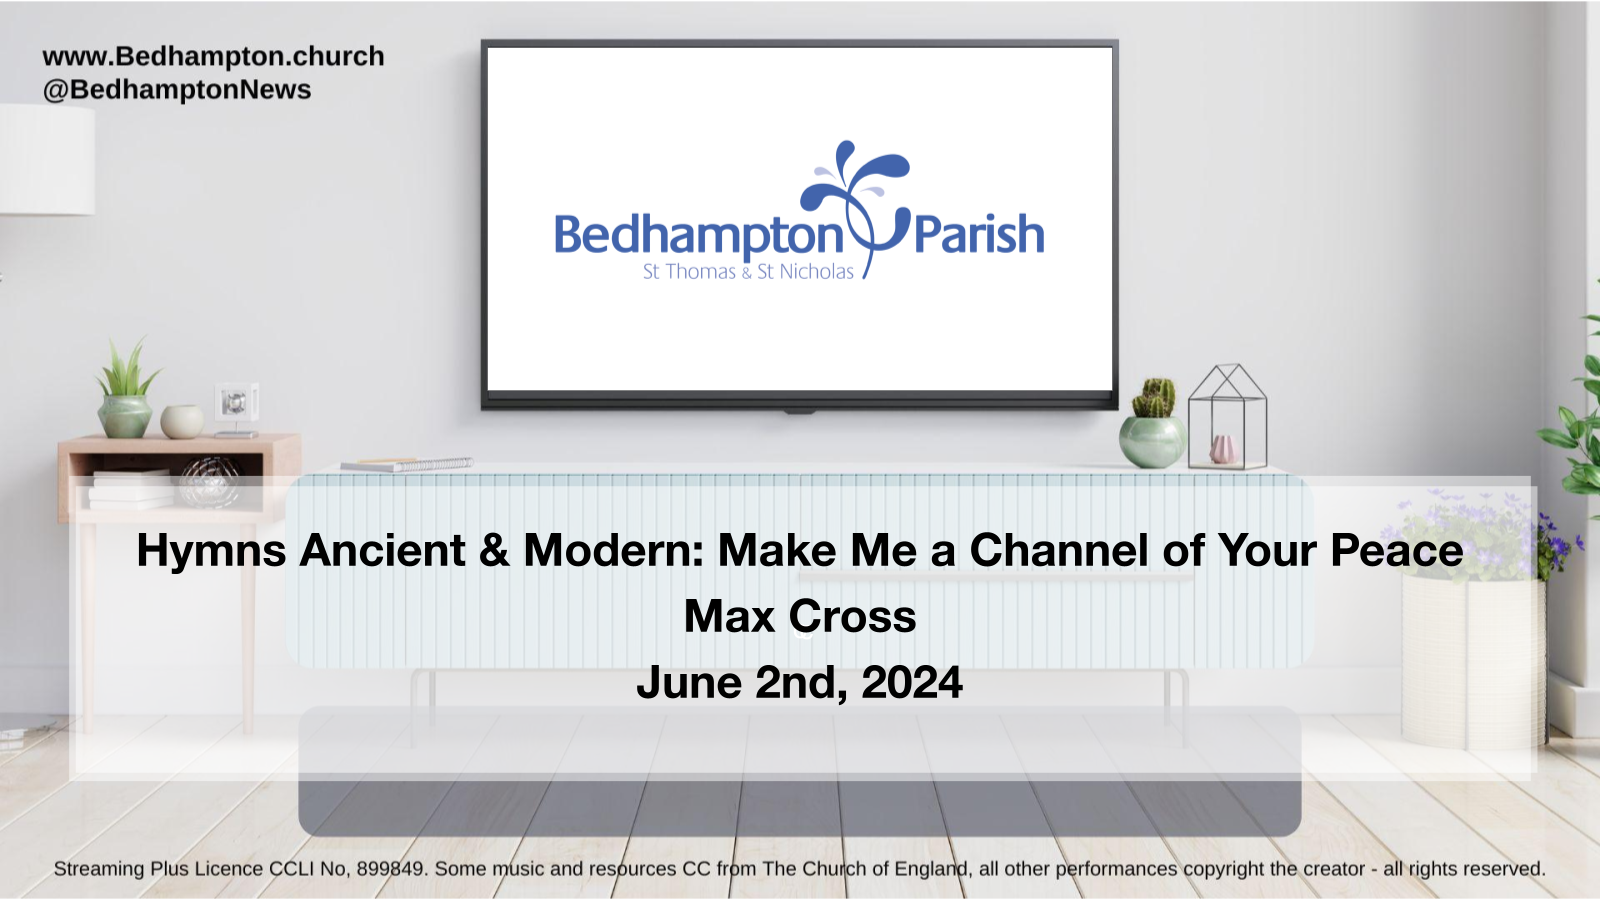 Sermon June 2nd, 2024 – Hymns Ancient & Modern: Make Me a Channel of Your Peace